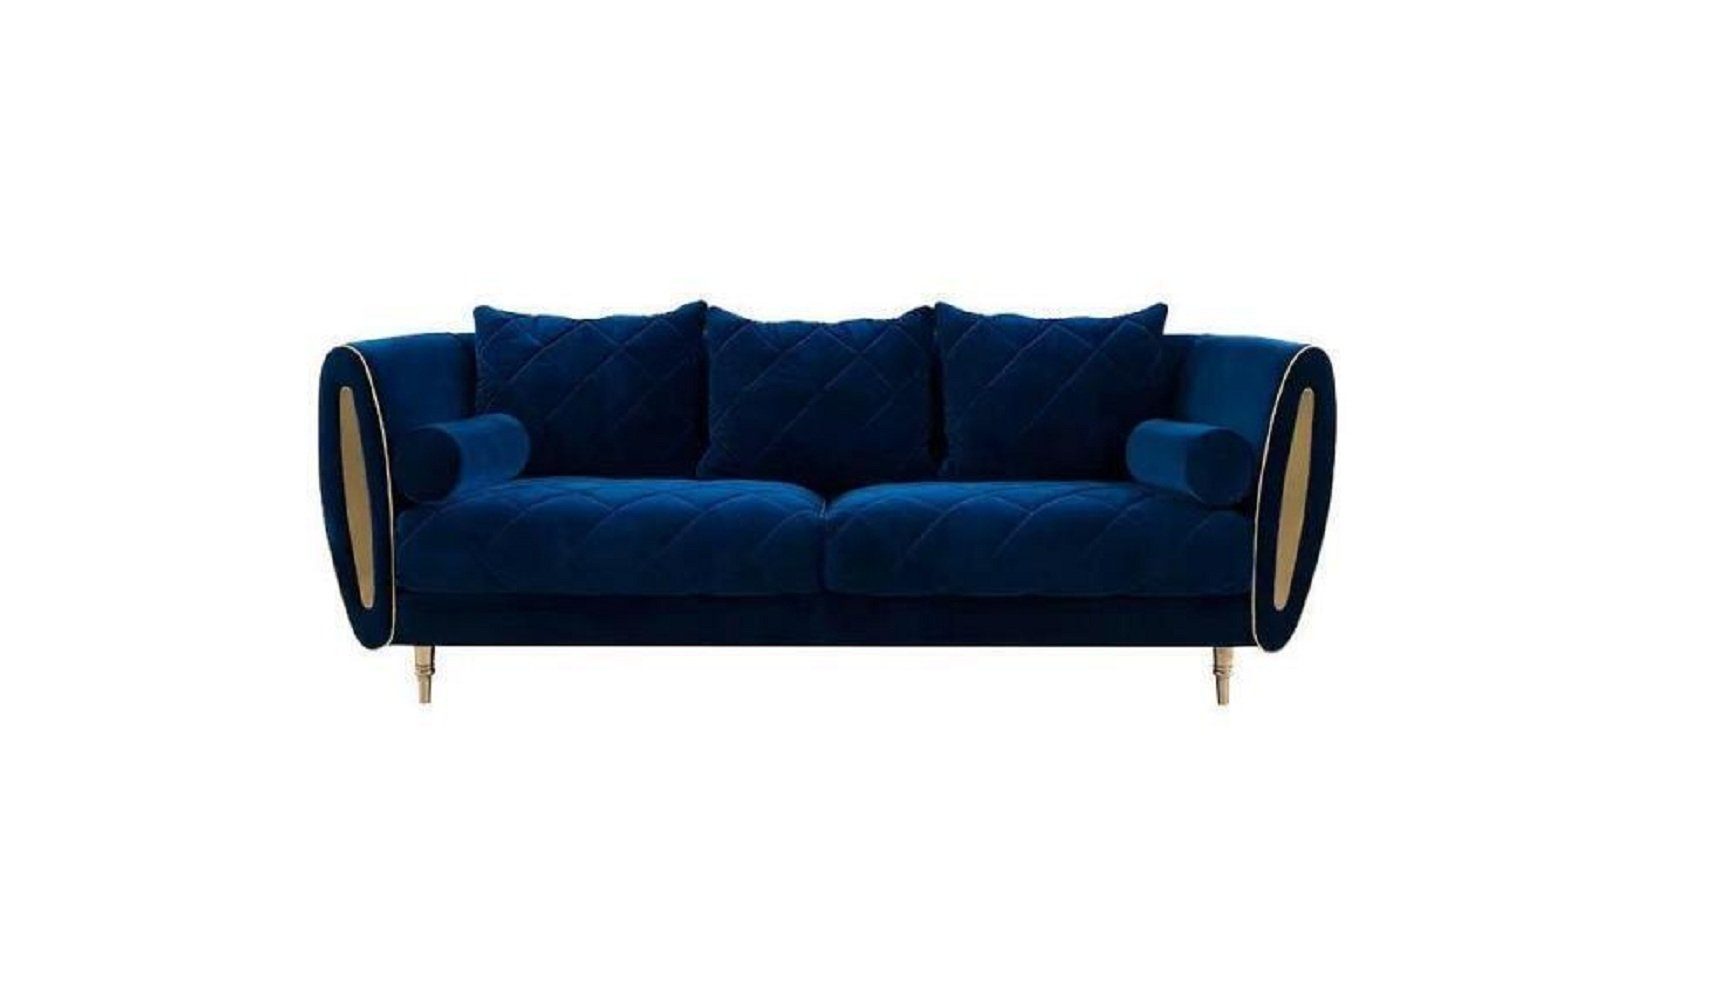 JVmoebel 2-Sitzer Design Blau Teile, in Sitzer Sofa Sofas Polster 2 1 Textil Stoff, Couch Relax Made Europa